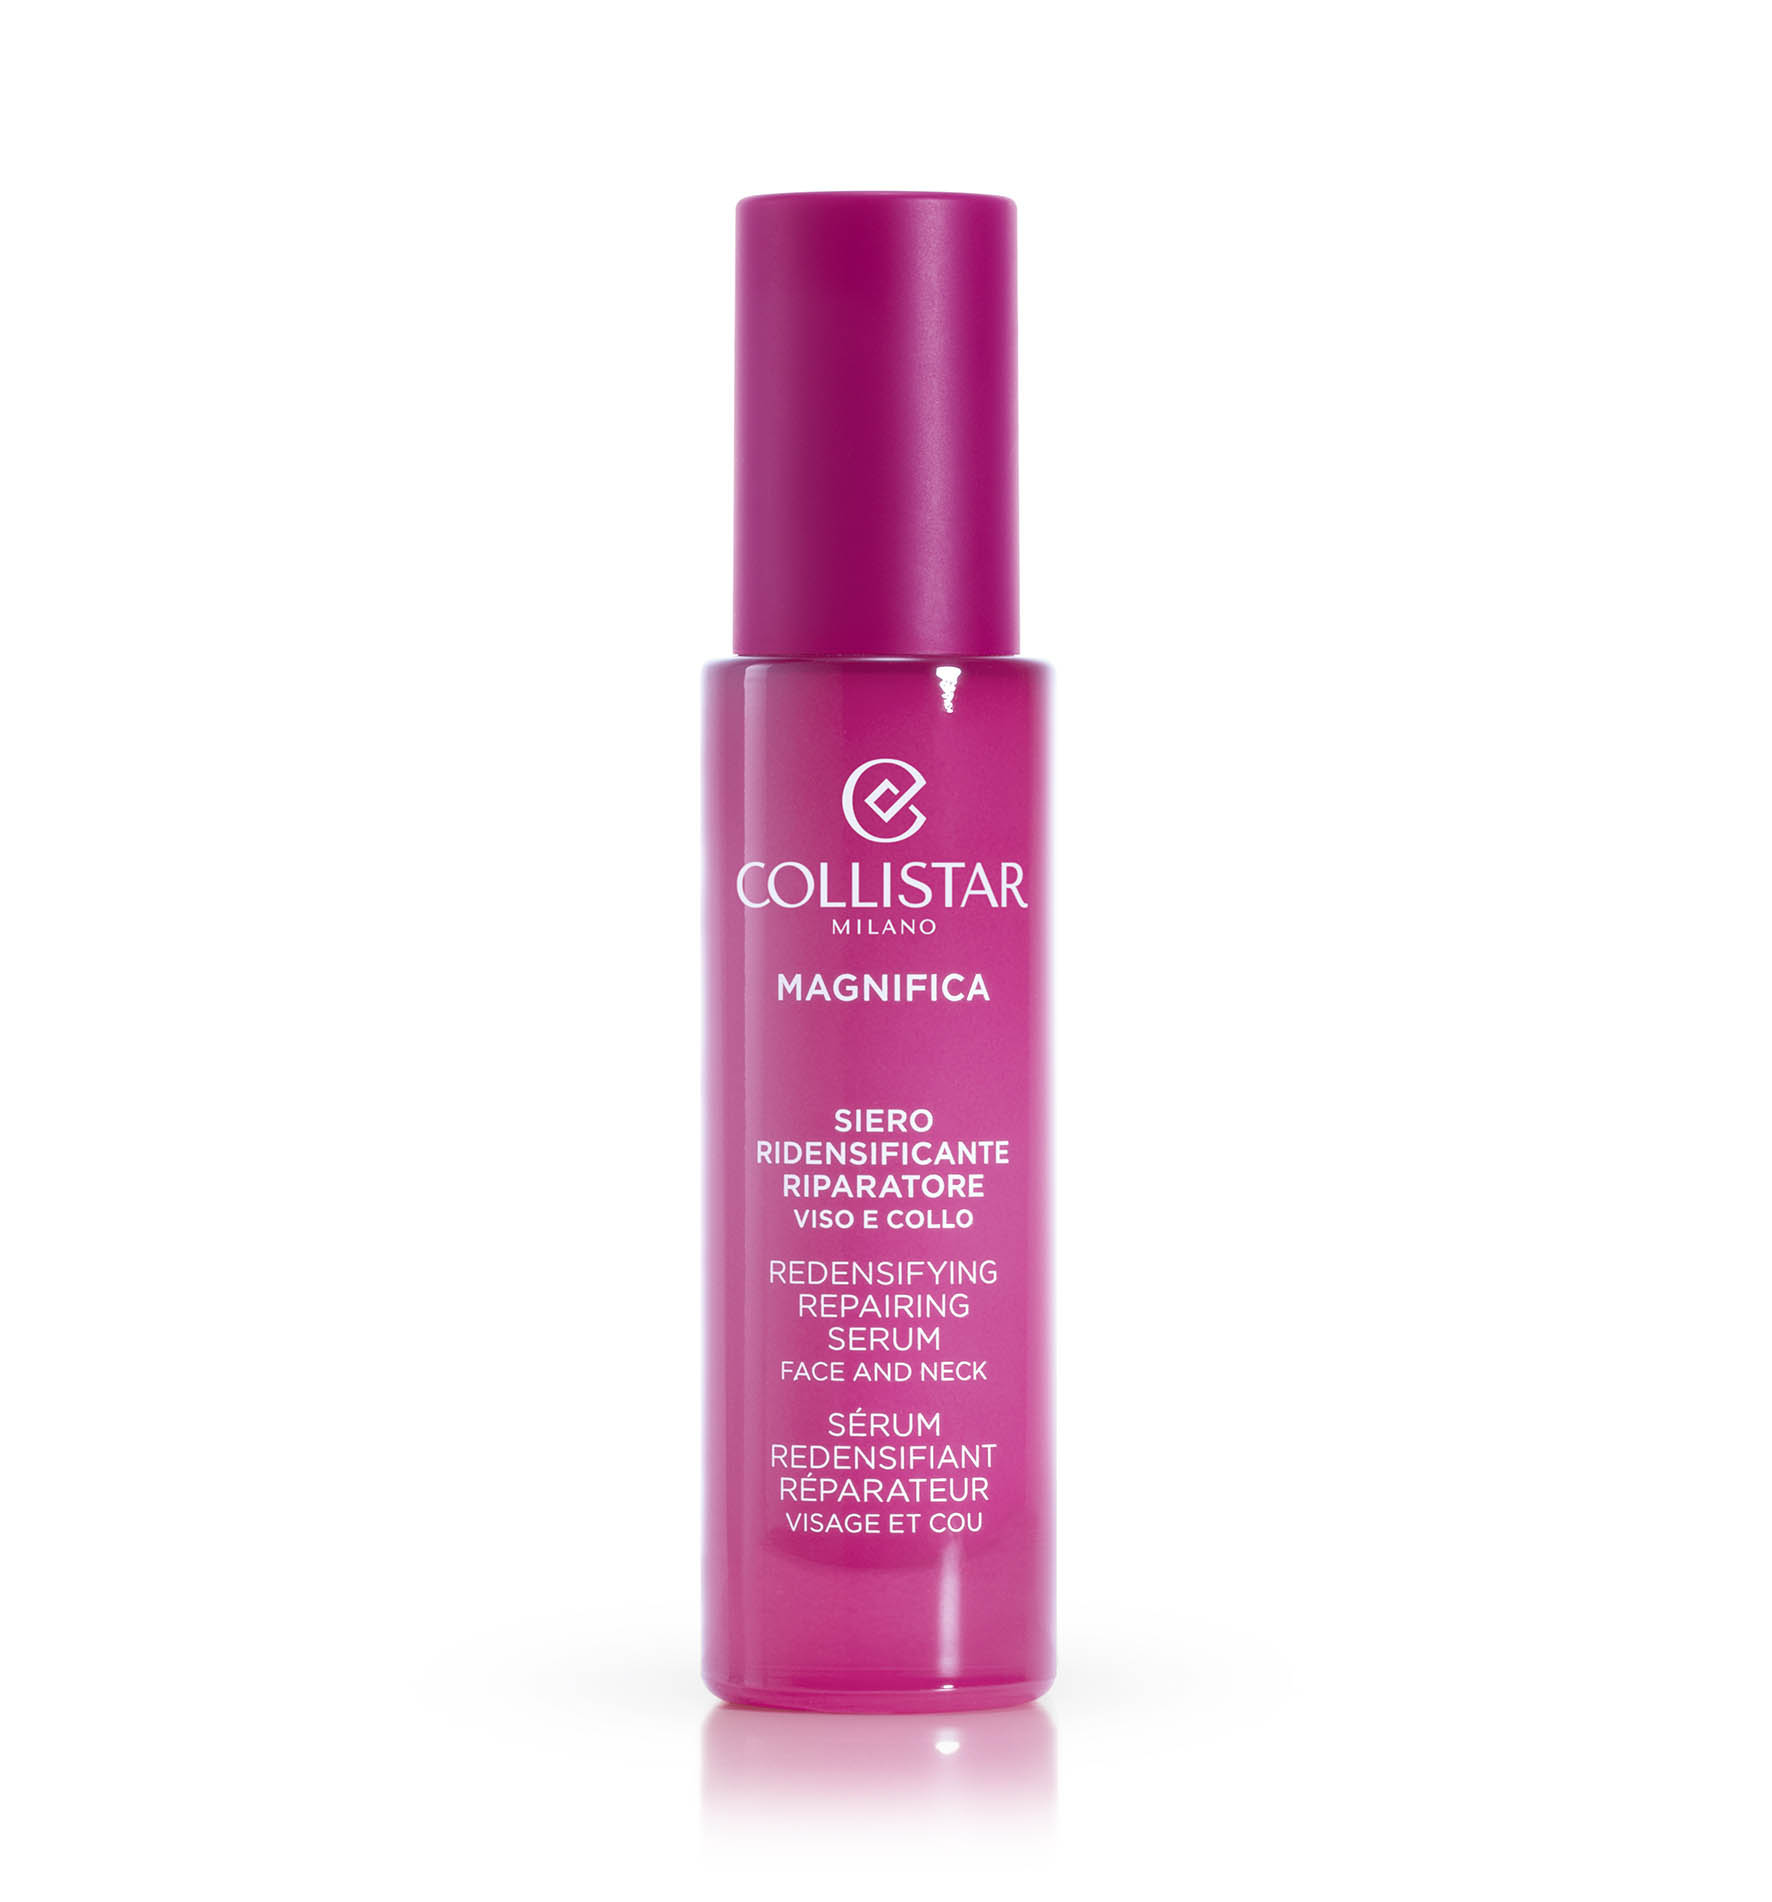 MAGNIFICA REDENSIFYING REPAIRING SERUM FACE AND NECK - Loss of tone and compactness | Collistar - Shop Online Ufficiale